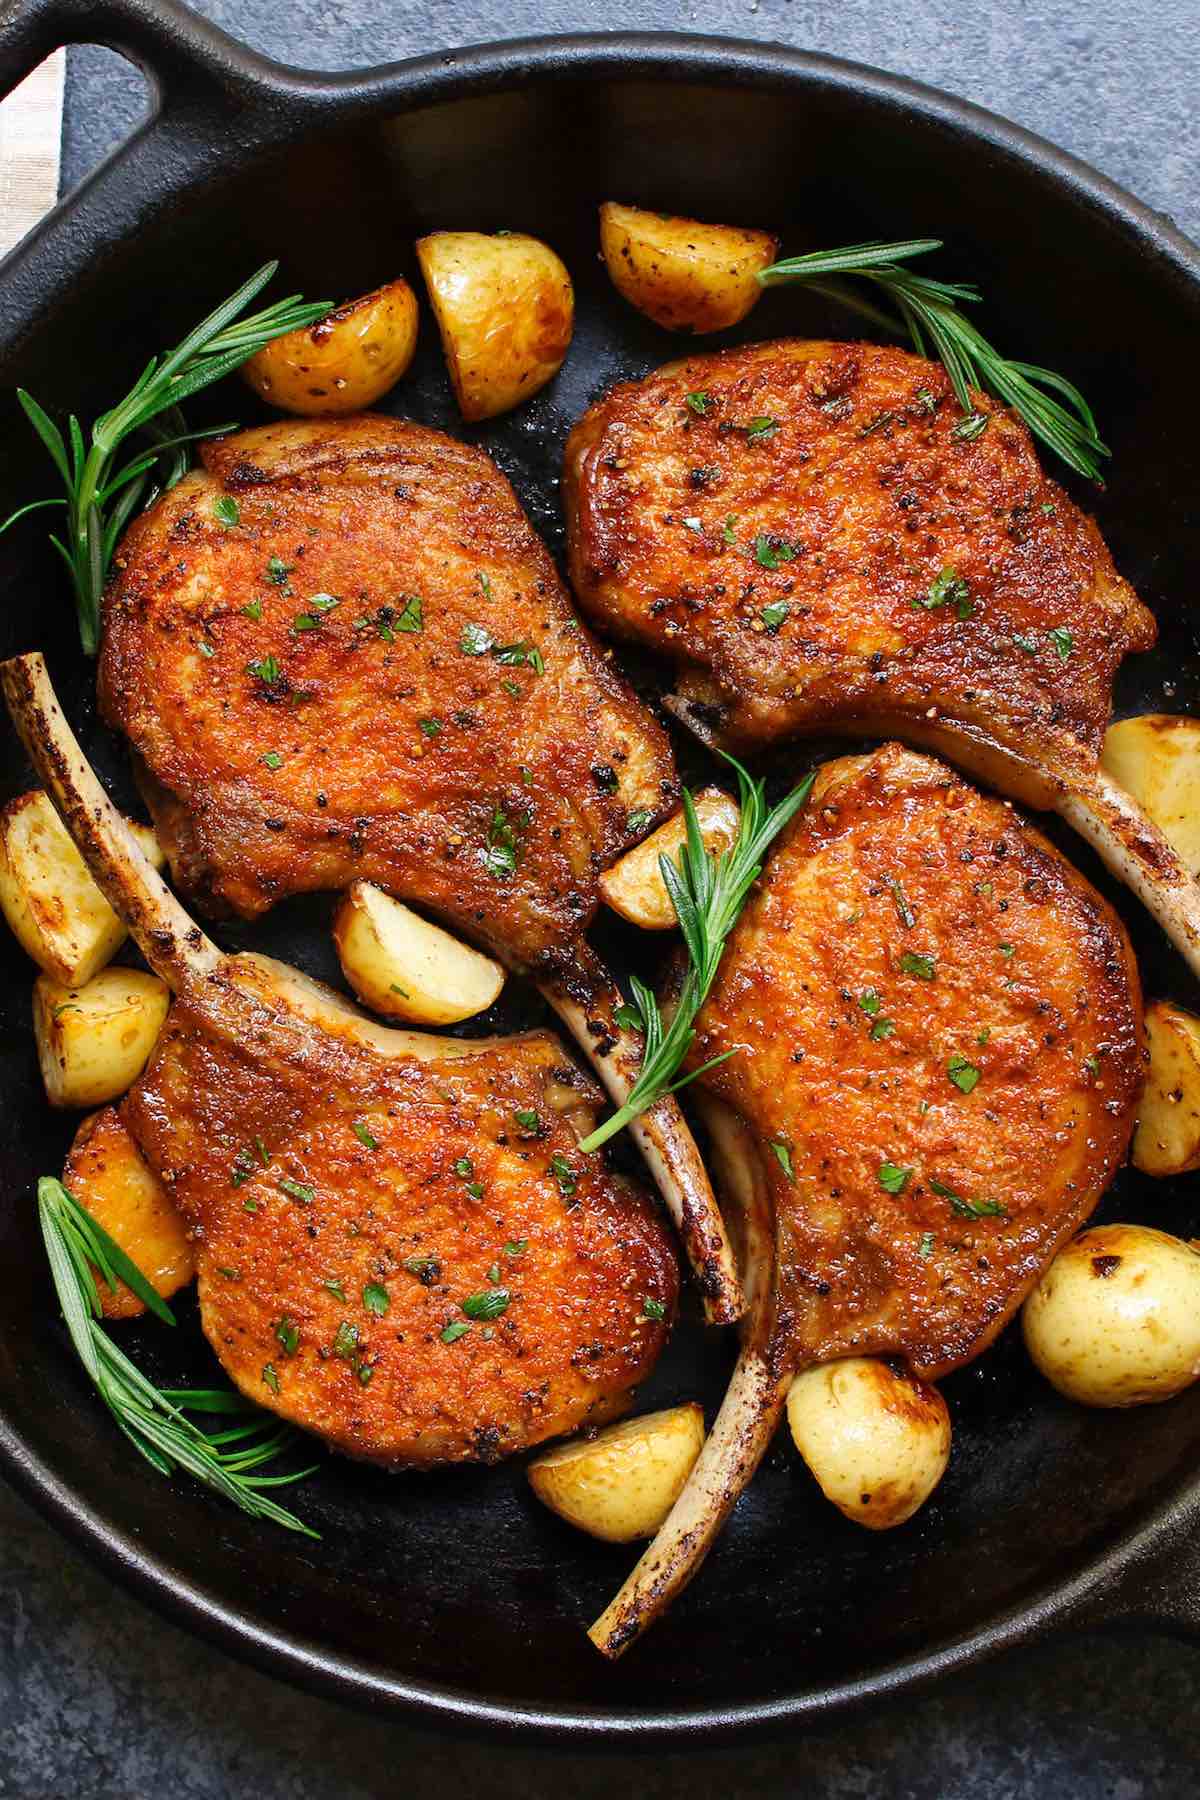 Tender and juicy pan fried pork chops in a cast iron skillet with sprigs of fresh rosemary and sauteed potatoes